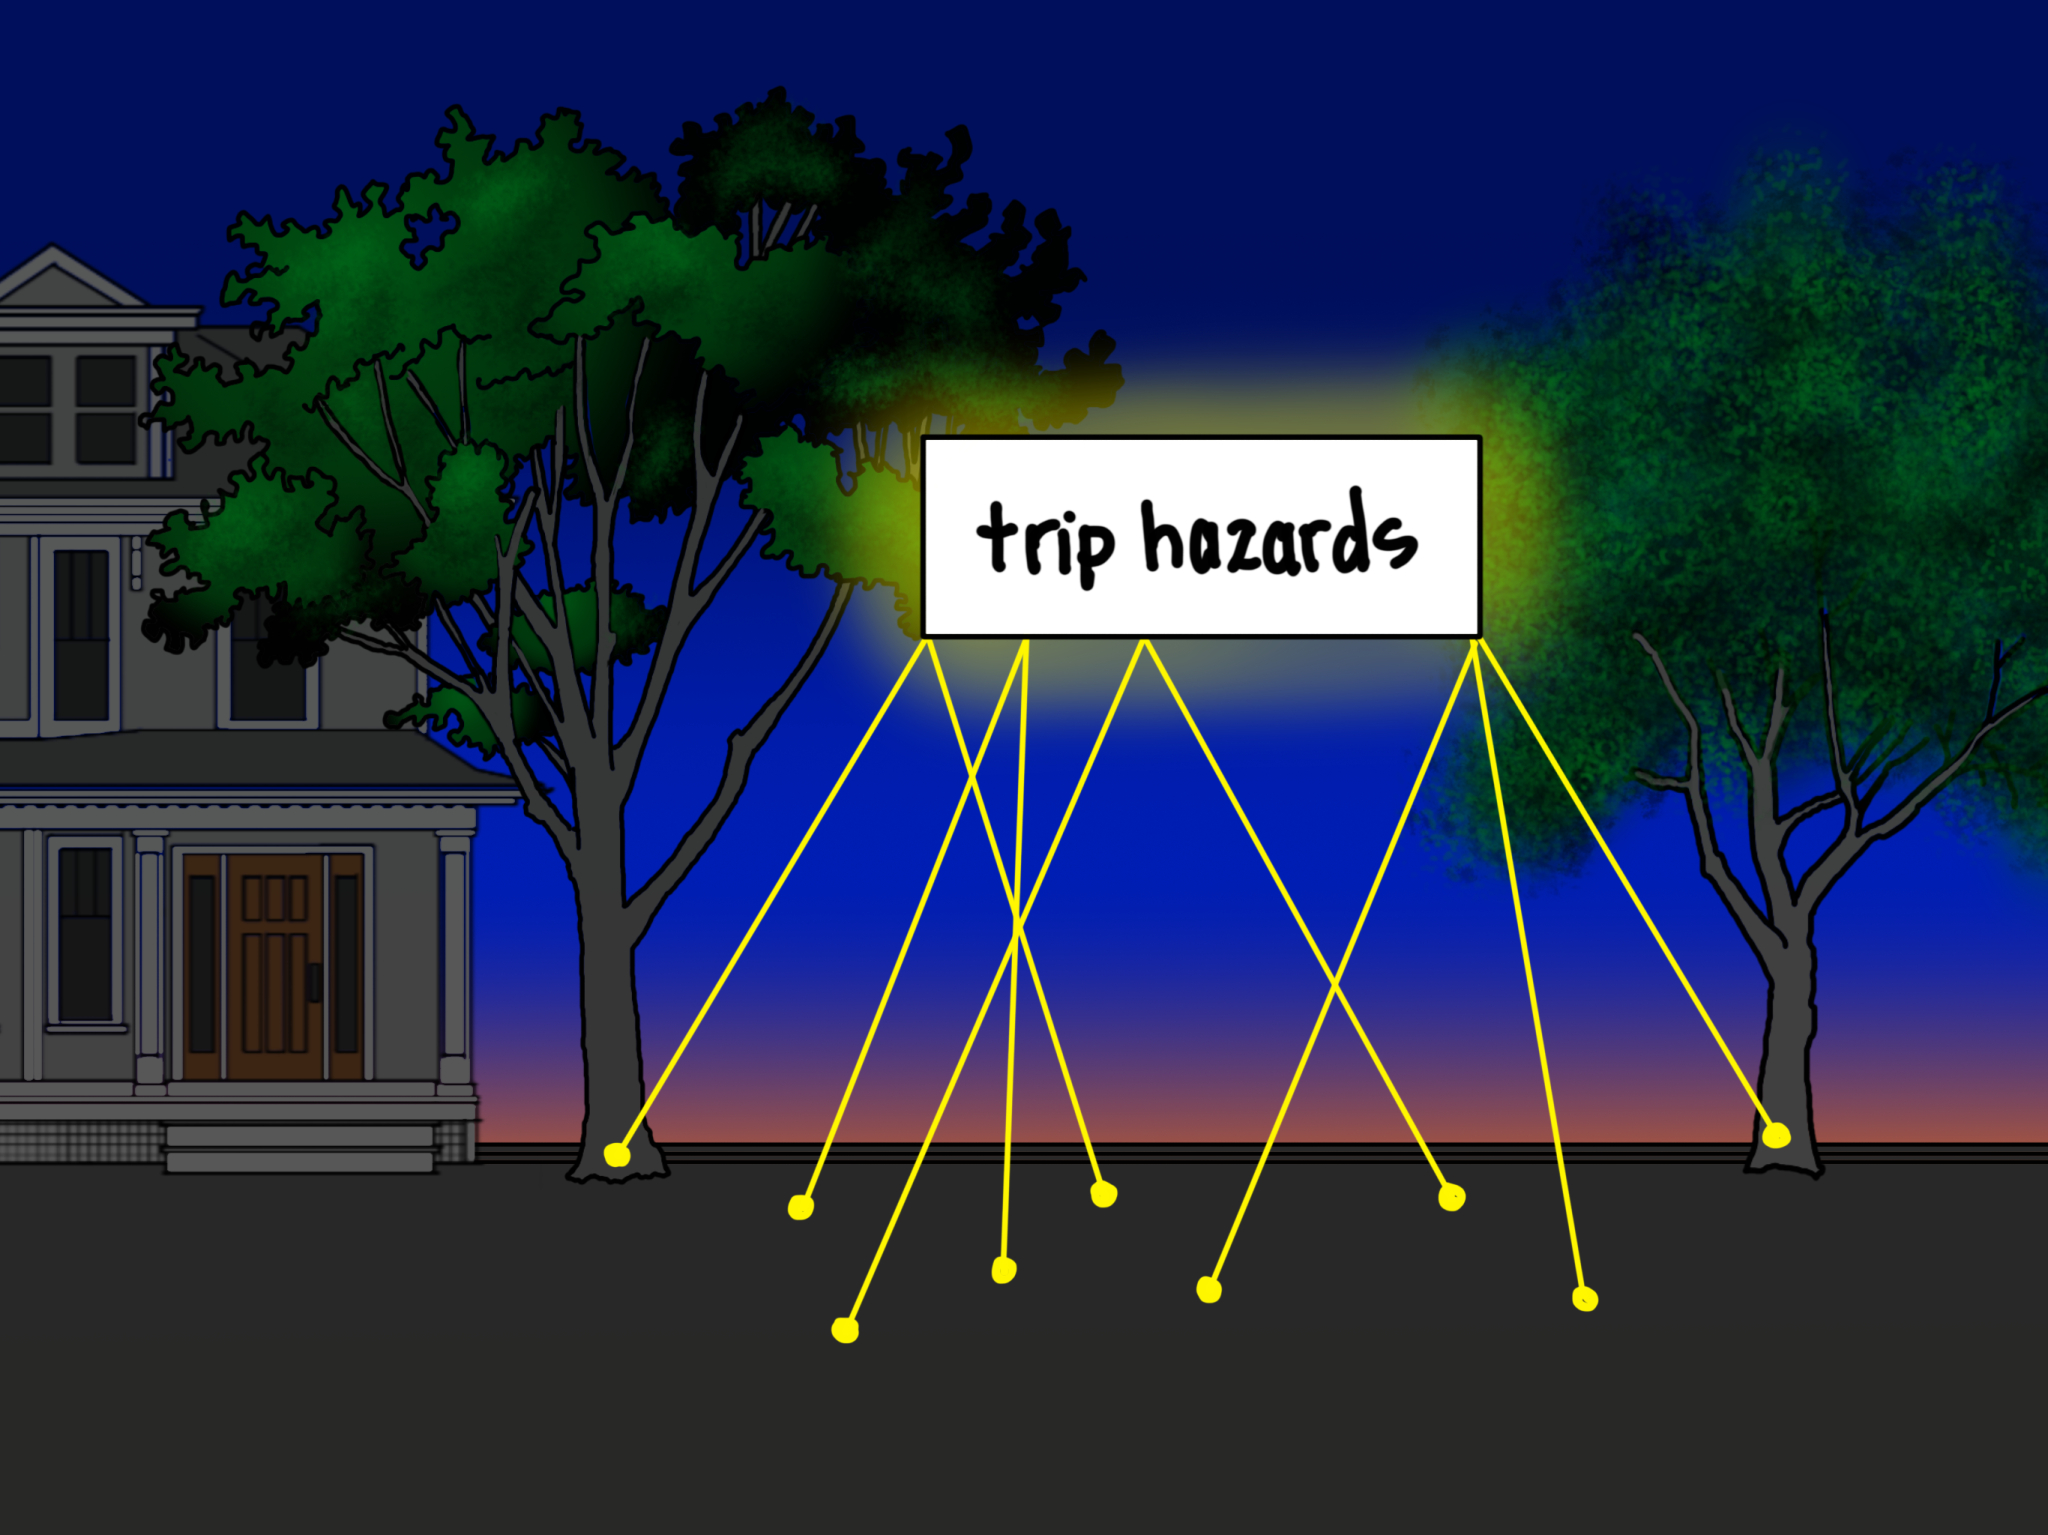 An illustration of the yard of a house at dusk, with a box that says "trip hazards" with arrows pointing to the ground of the entire yard